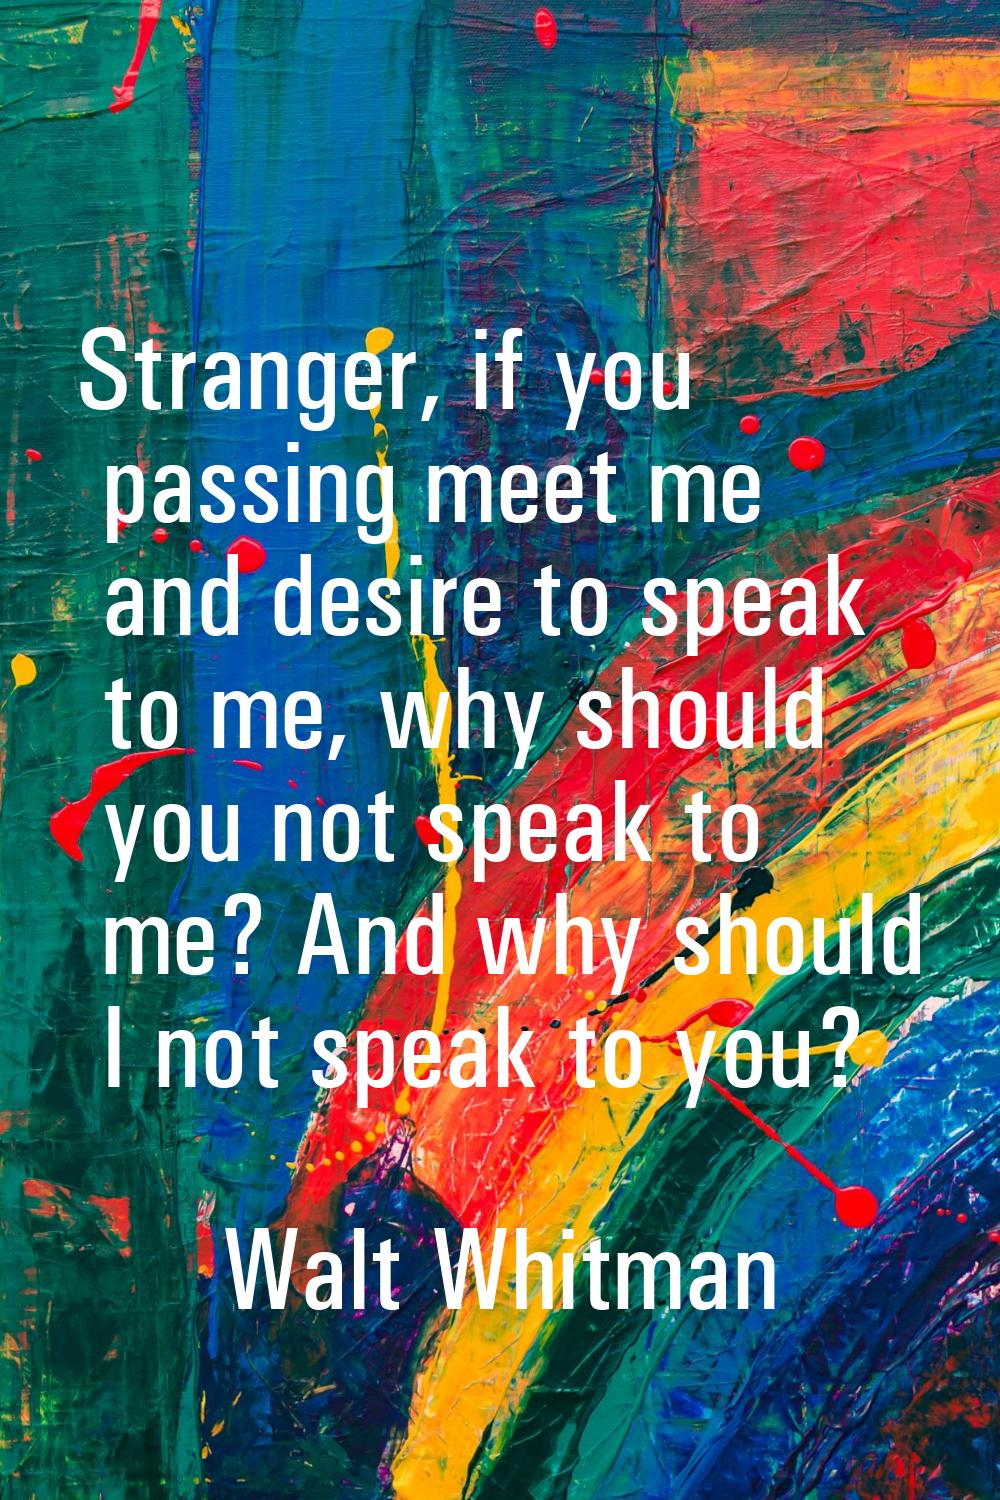 Stranger, if you passing meet me and desire to speak to me, why should you not speak to me? And why